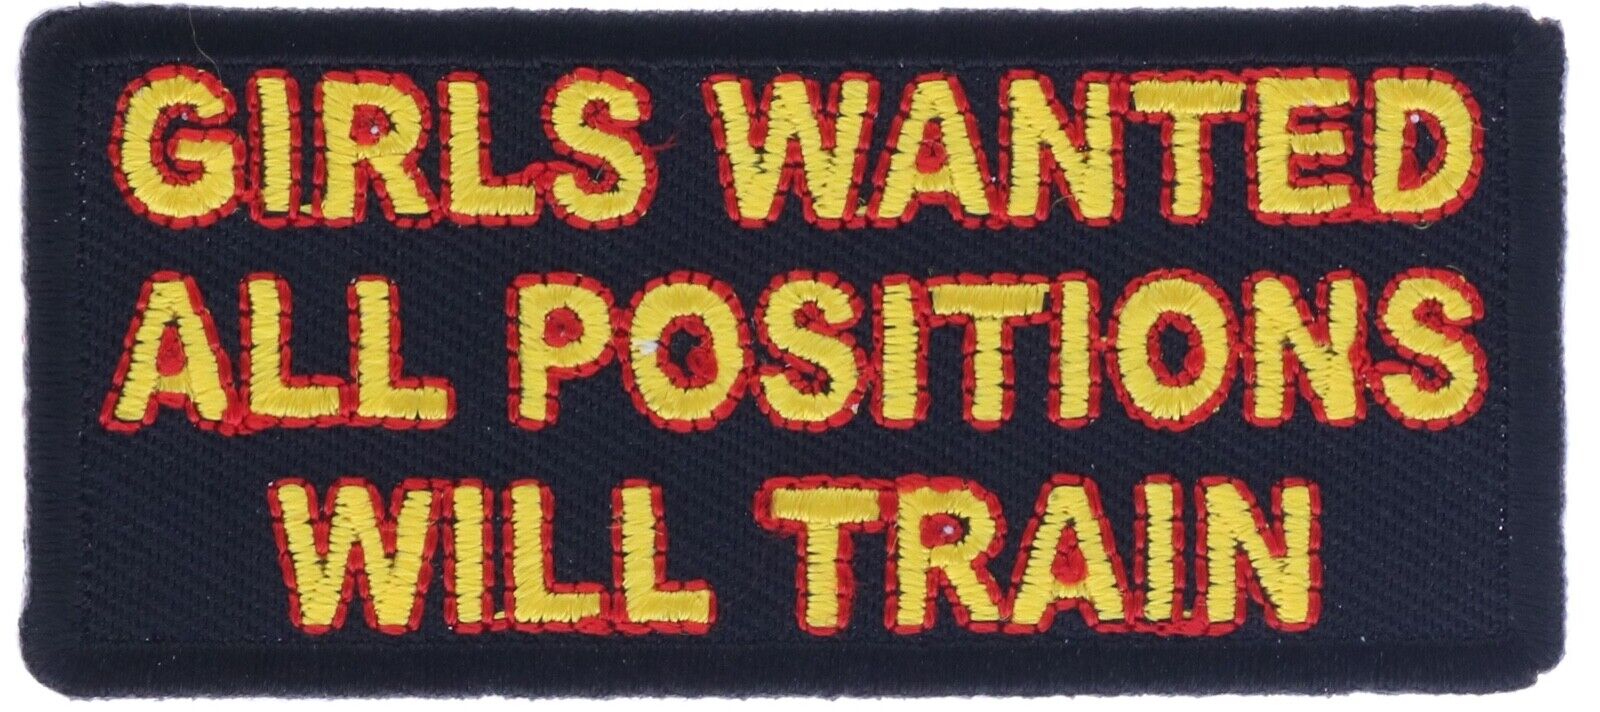 Girls Wanted All Positions Will Train Fun Joke 3 Inch Patch IV2947 F1D17L